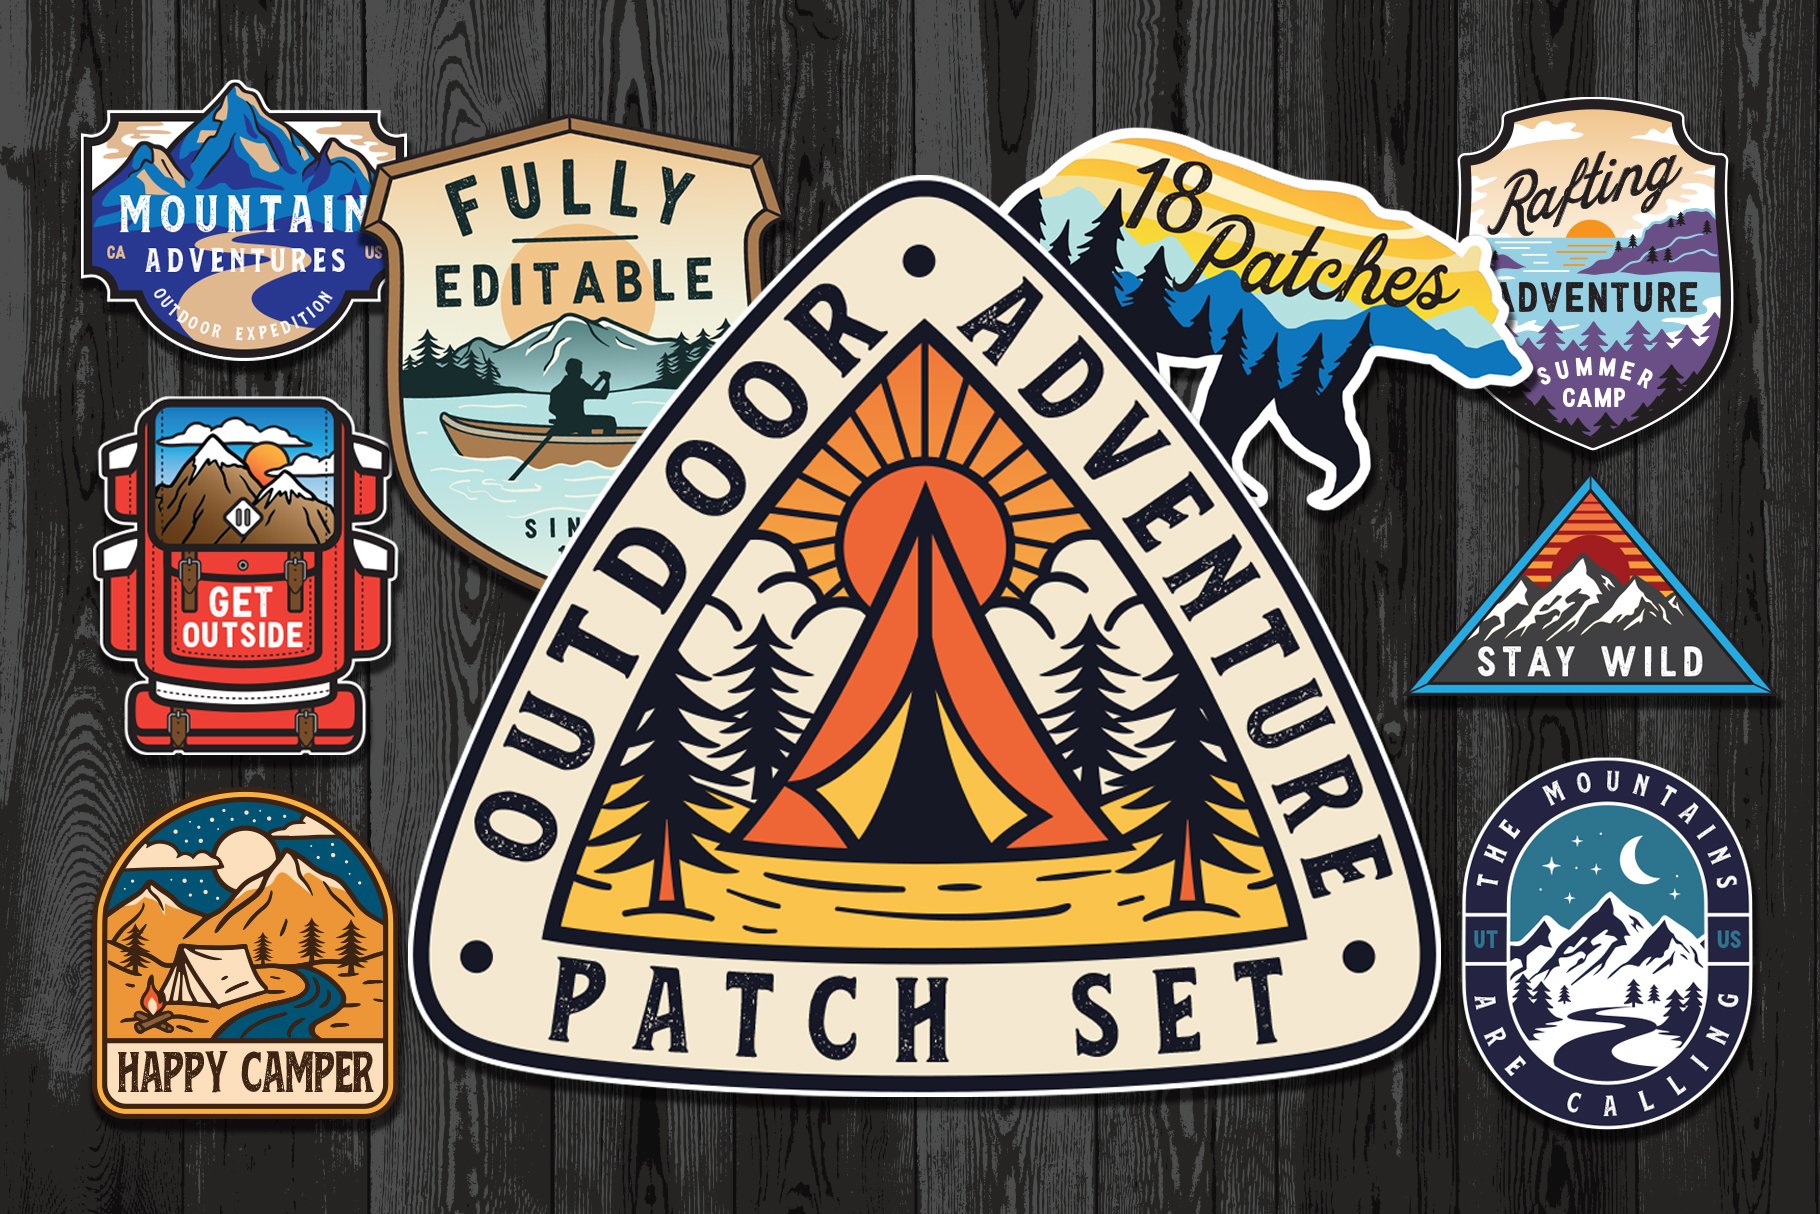 Outdoor Adventure Patch Set cover image.